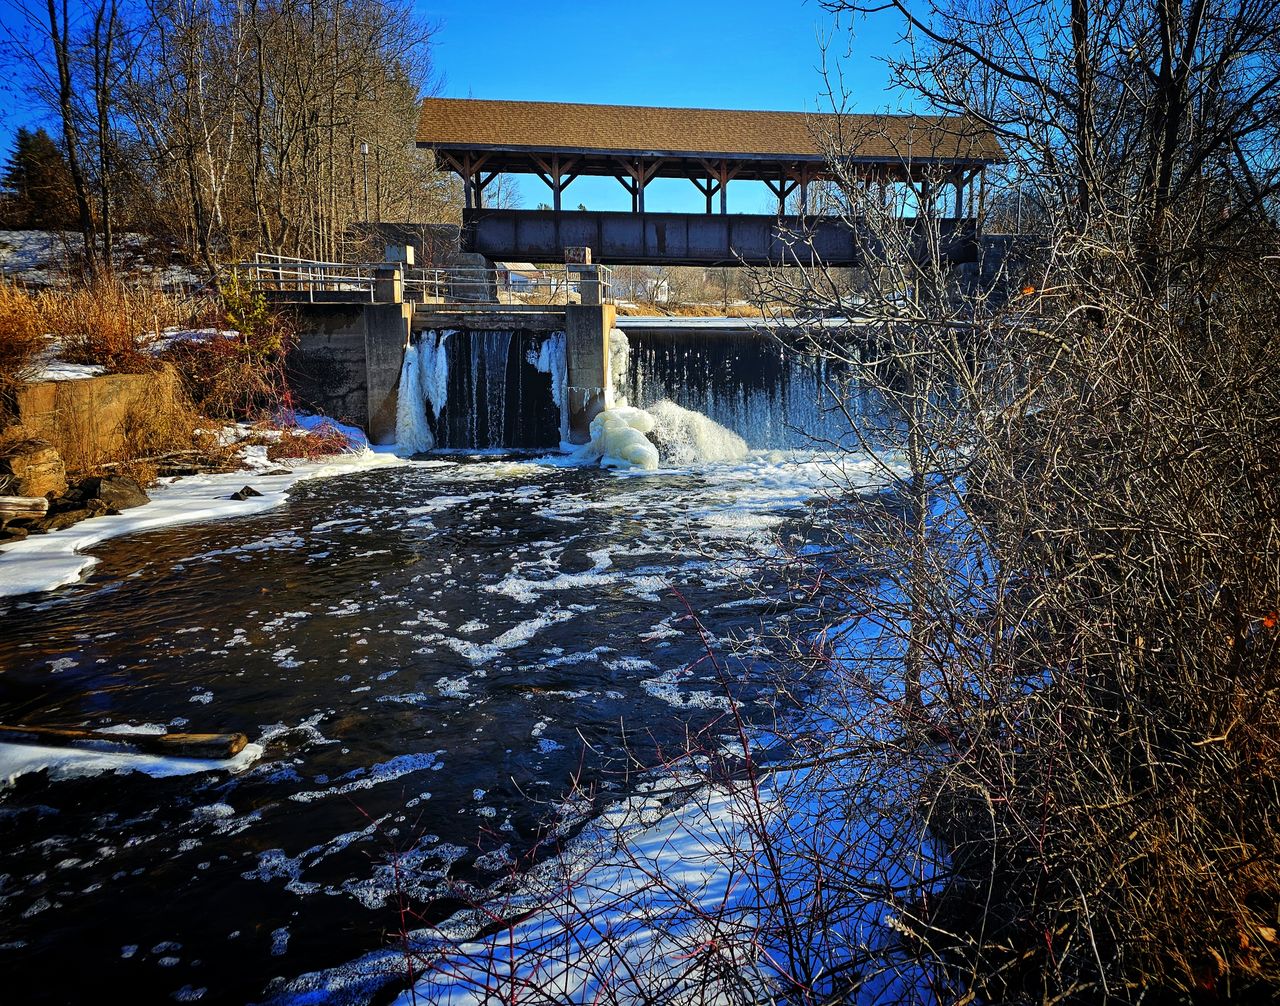 winter, tree, water, architecture, built structure, nature, reflection, plant, river, snow, bare tree, cold temperature, waterfall, sky, no people, day, bridge, building exterior, flowing water, autumn, ice, blue, frozen, environment, outdoors, scenics - nature, clear sky, beauty in nature, motion, flowing